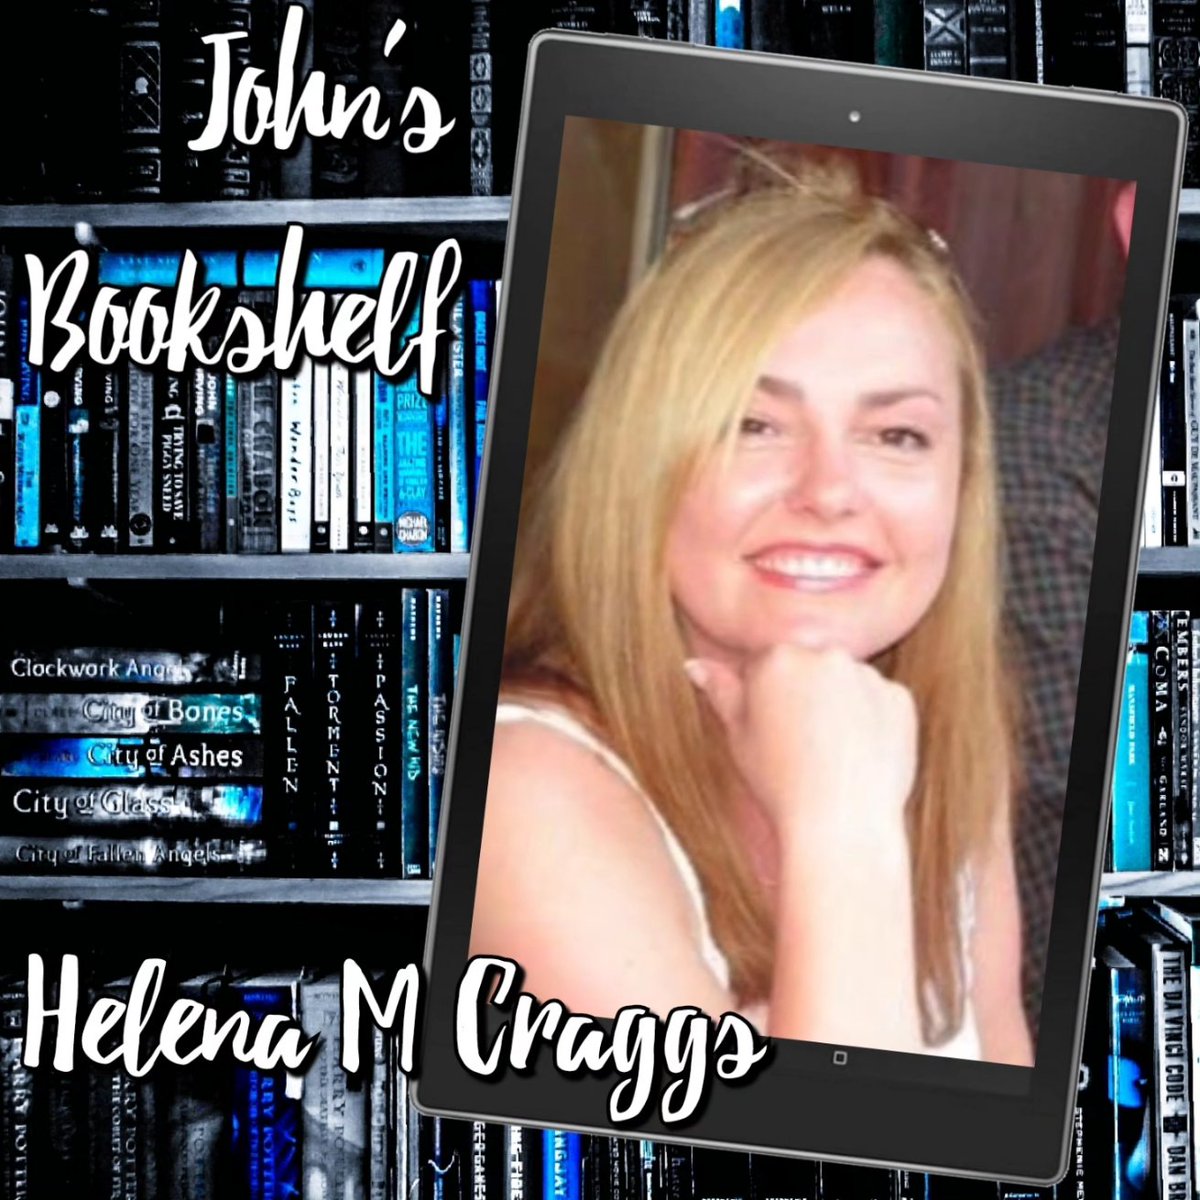 I've just read The Younglings: Mayhem & Magic, by @h_craggs

My Review of this brilliant book can be read here: instagram.com/p/Csjfxh6rTfh/…

#theyounglings #mayhemandmagic #helenamcraggs #lovebookstours #johnsbookshelf #honestreviewsonly